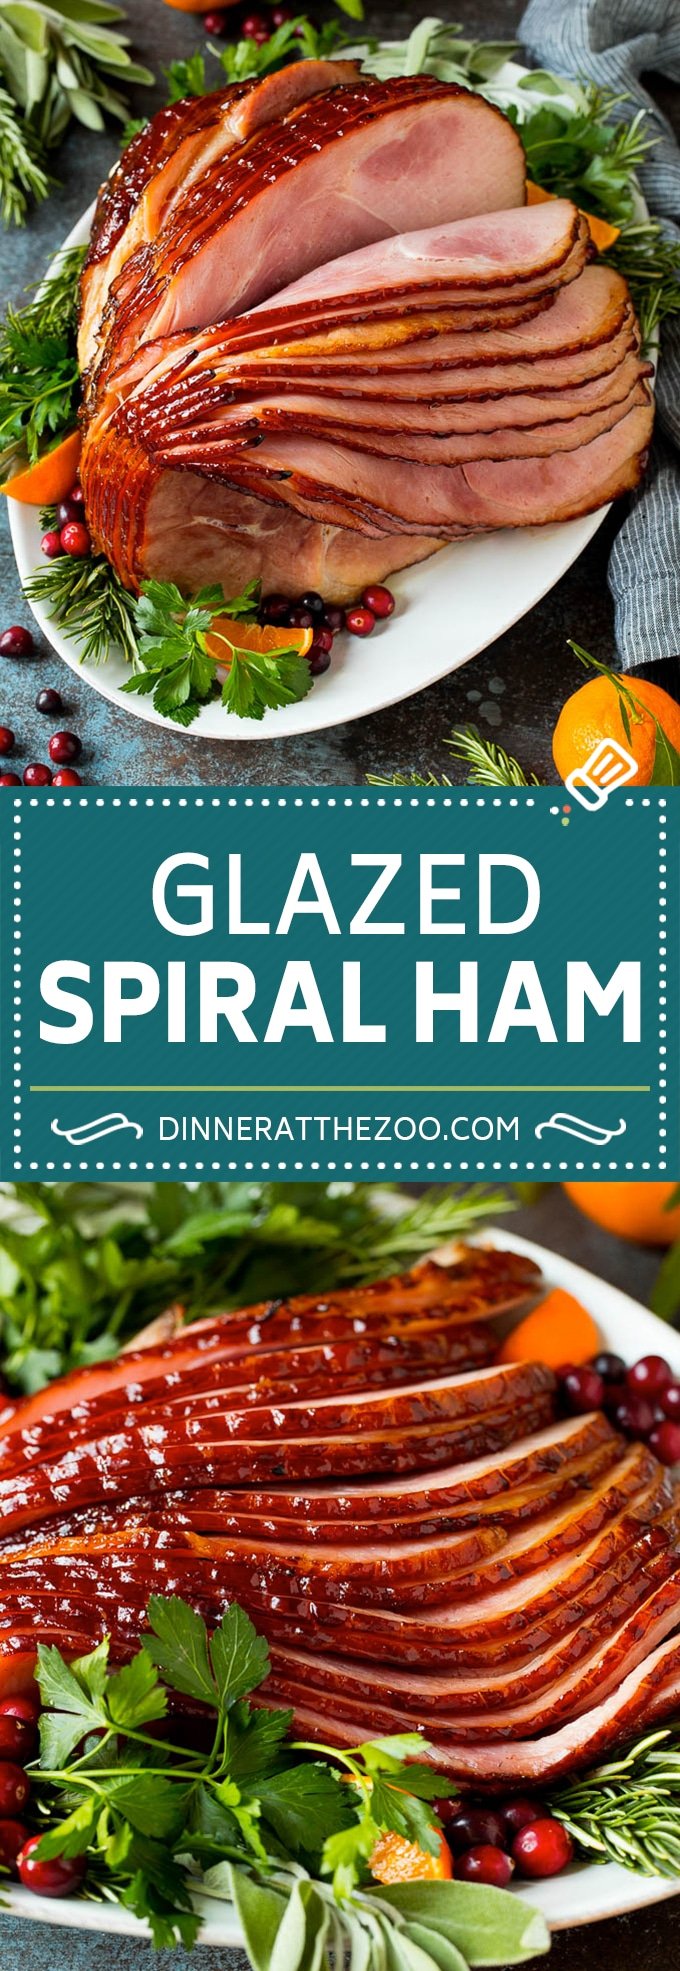 This spiral ham is coated in a homemade brown sugar glaze, then baked in the oven to tender and juicy perfection.